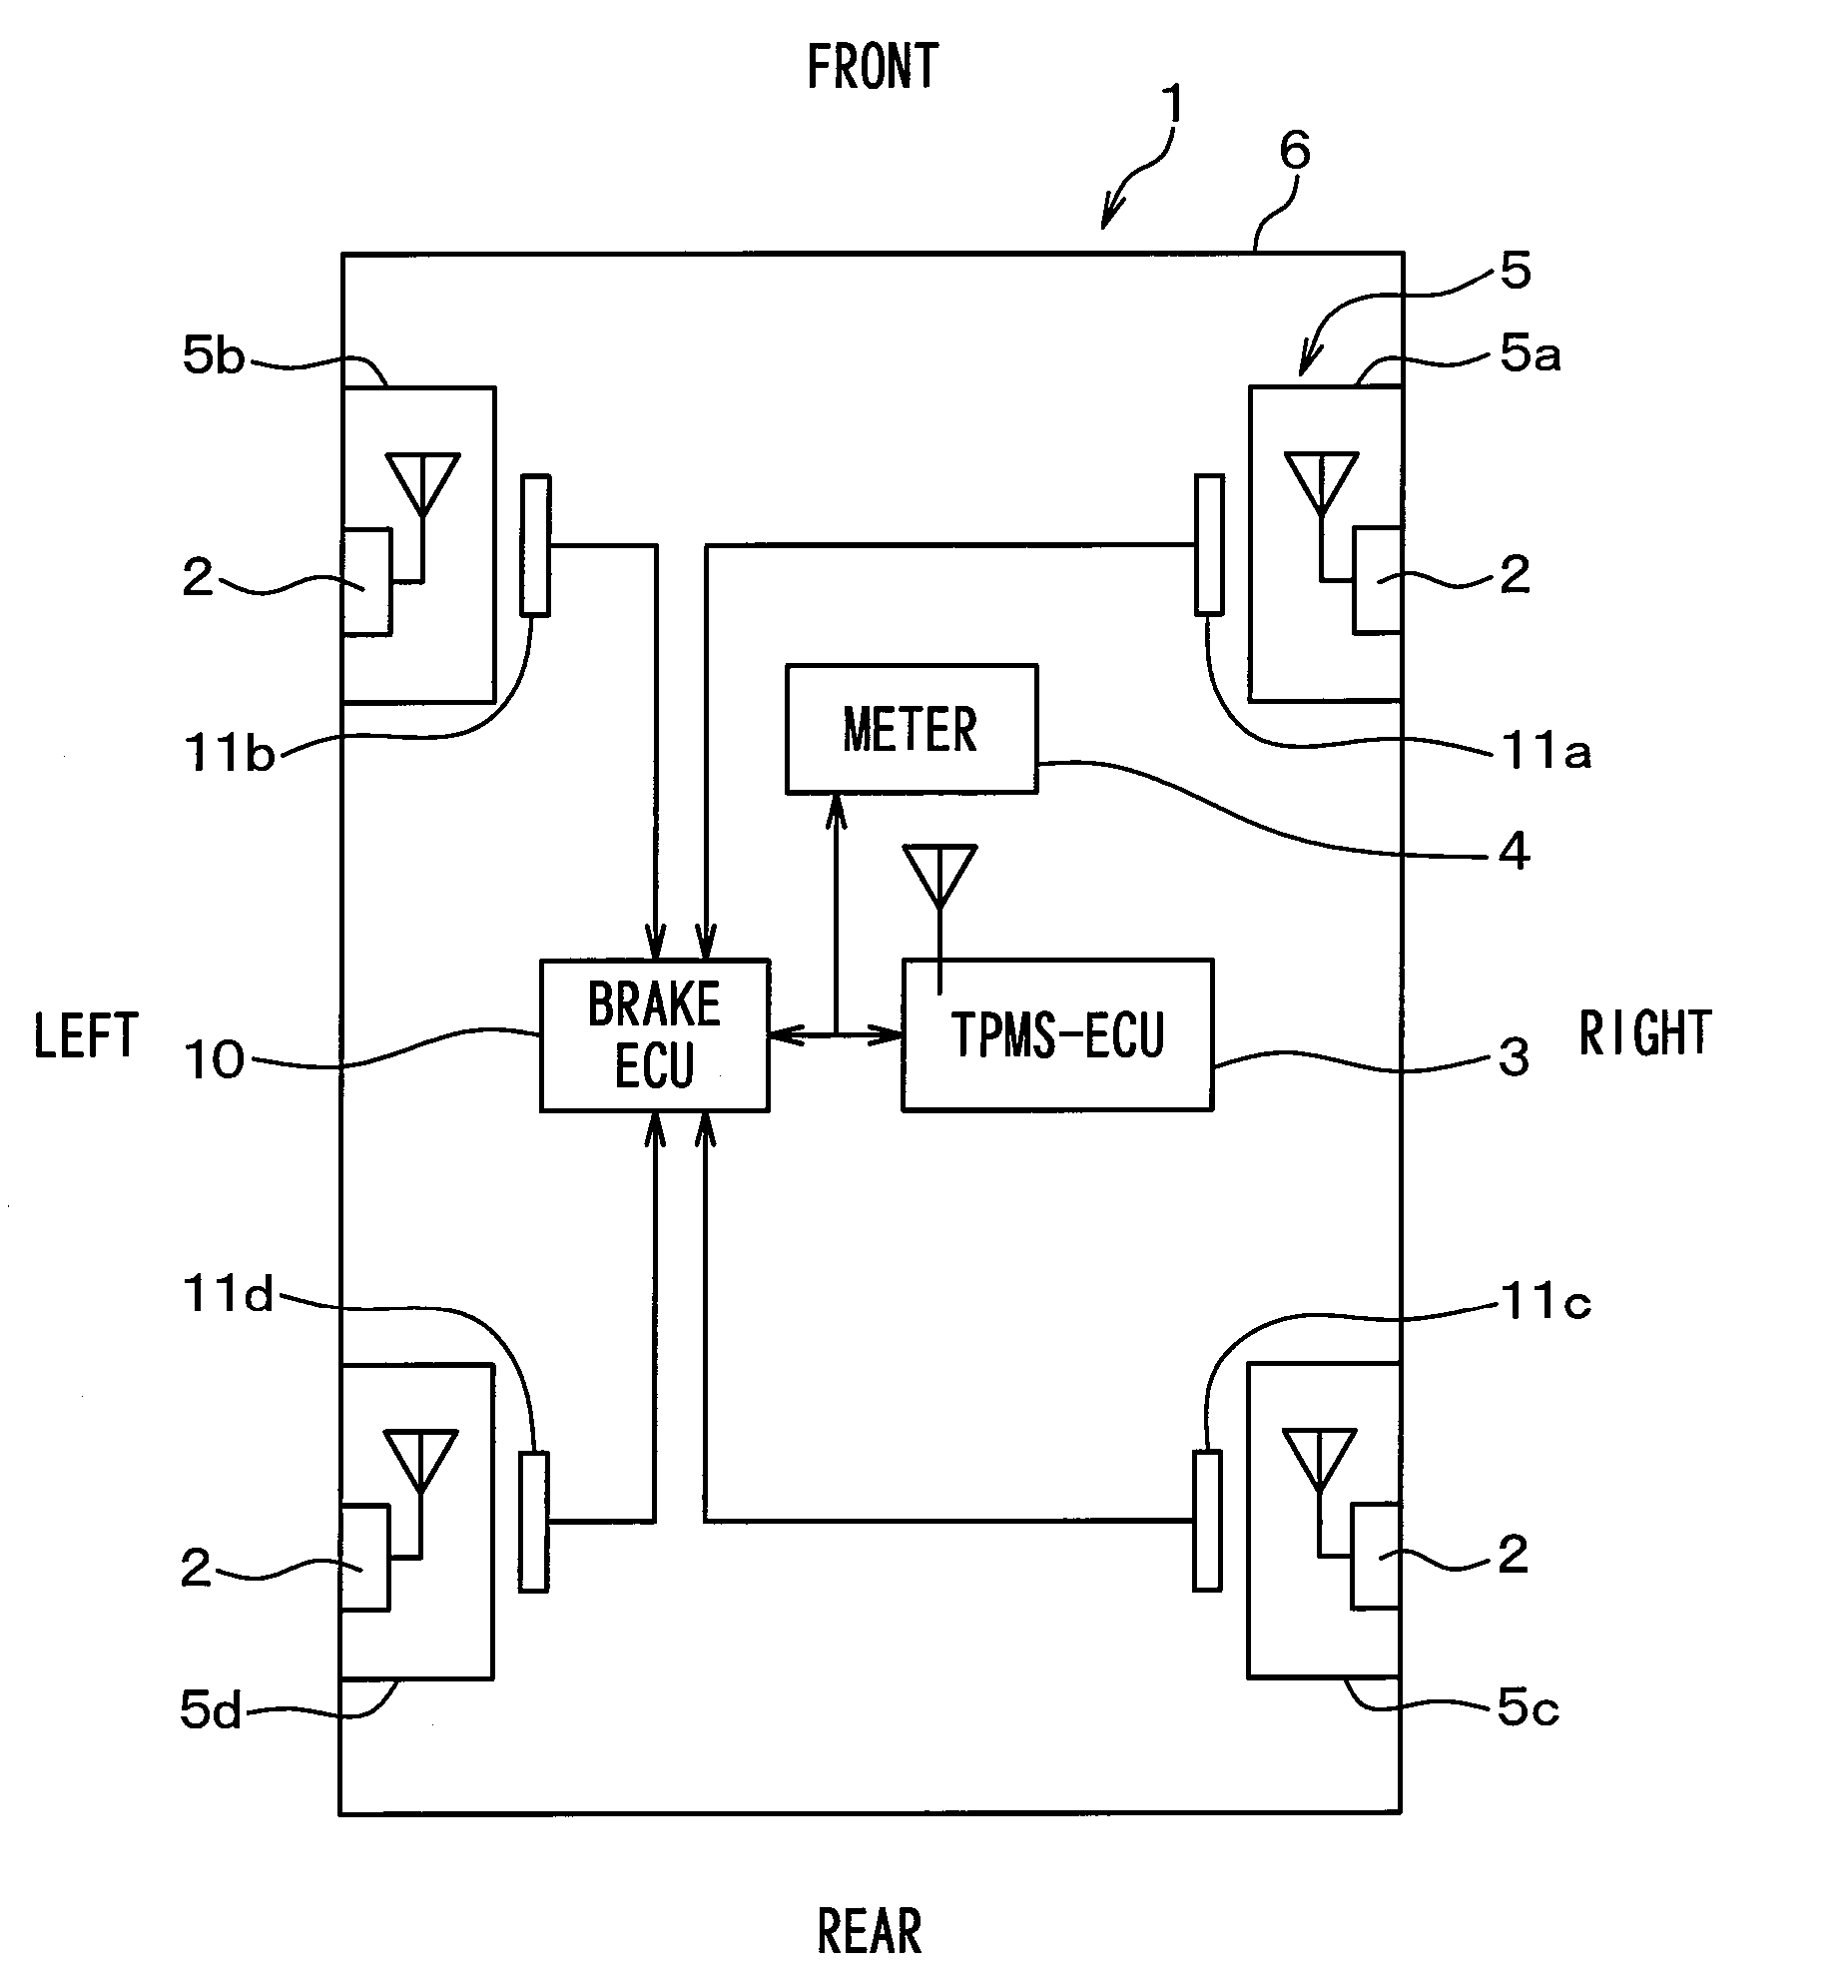 Wheel position detector and tire inflation pressure detector having the same